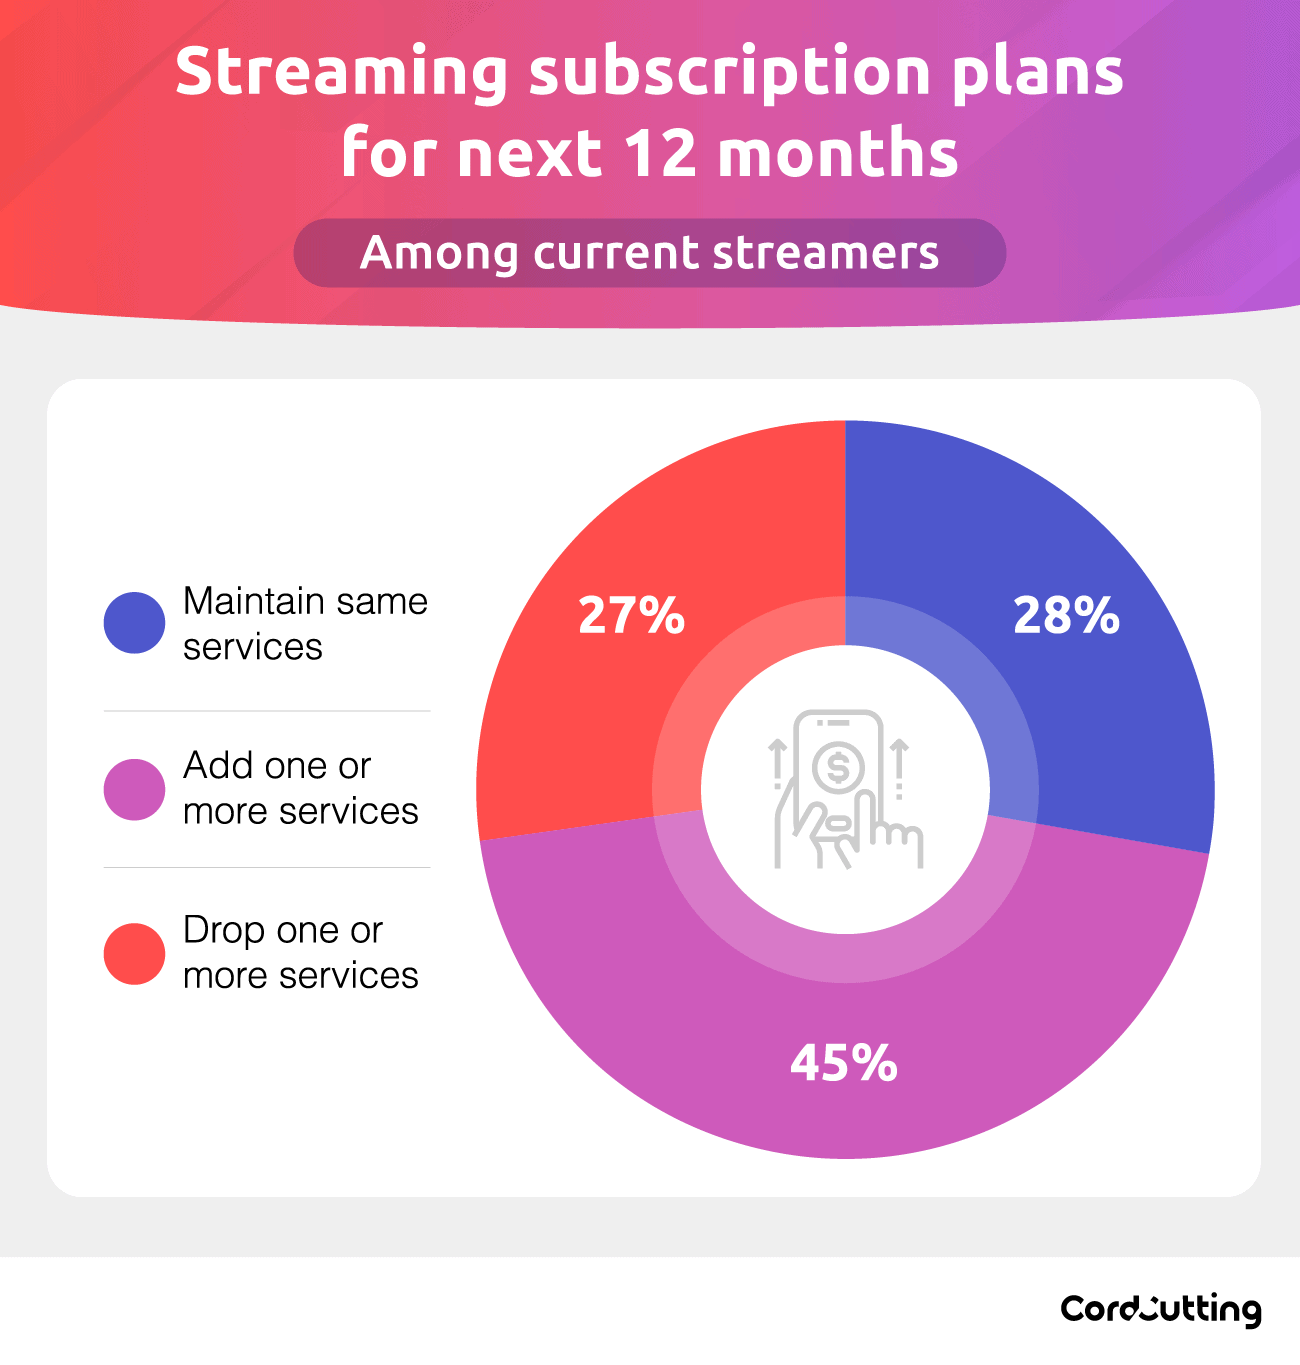 Streaming subscription plans for next 12 months